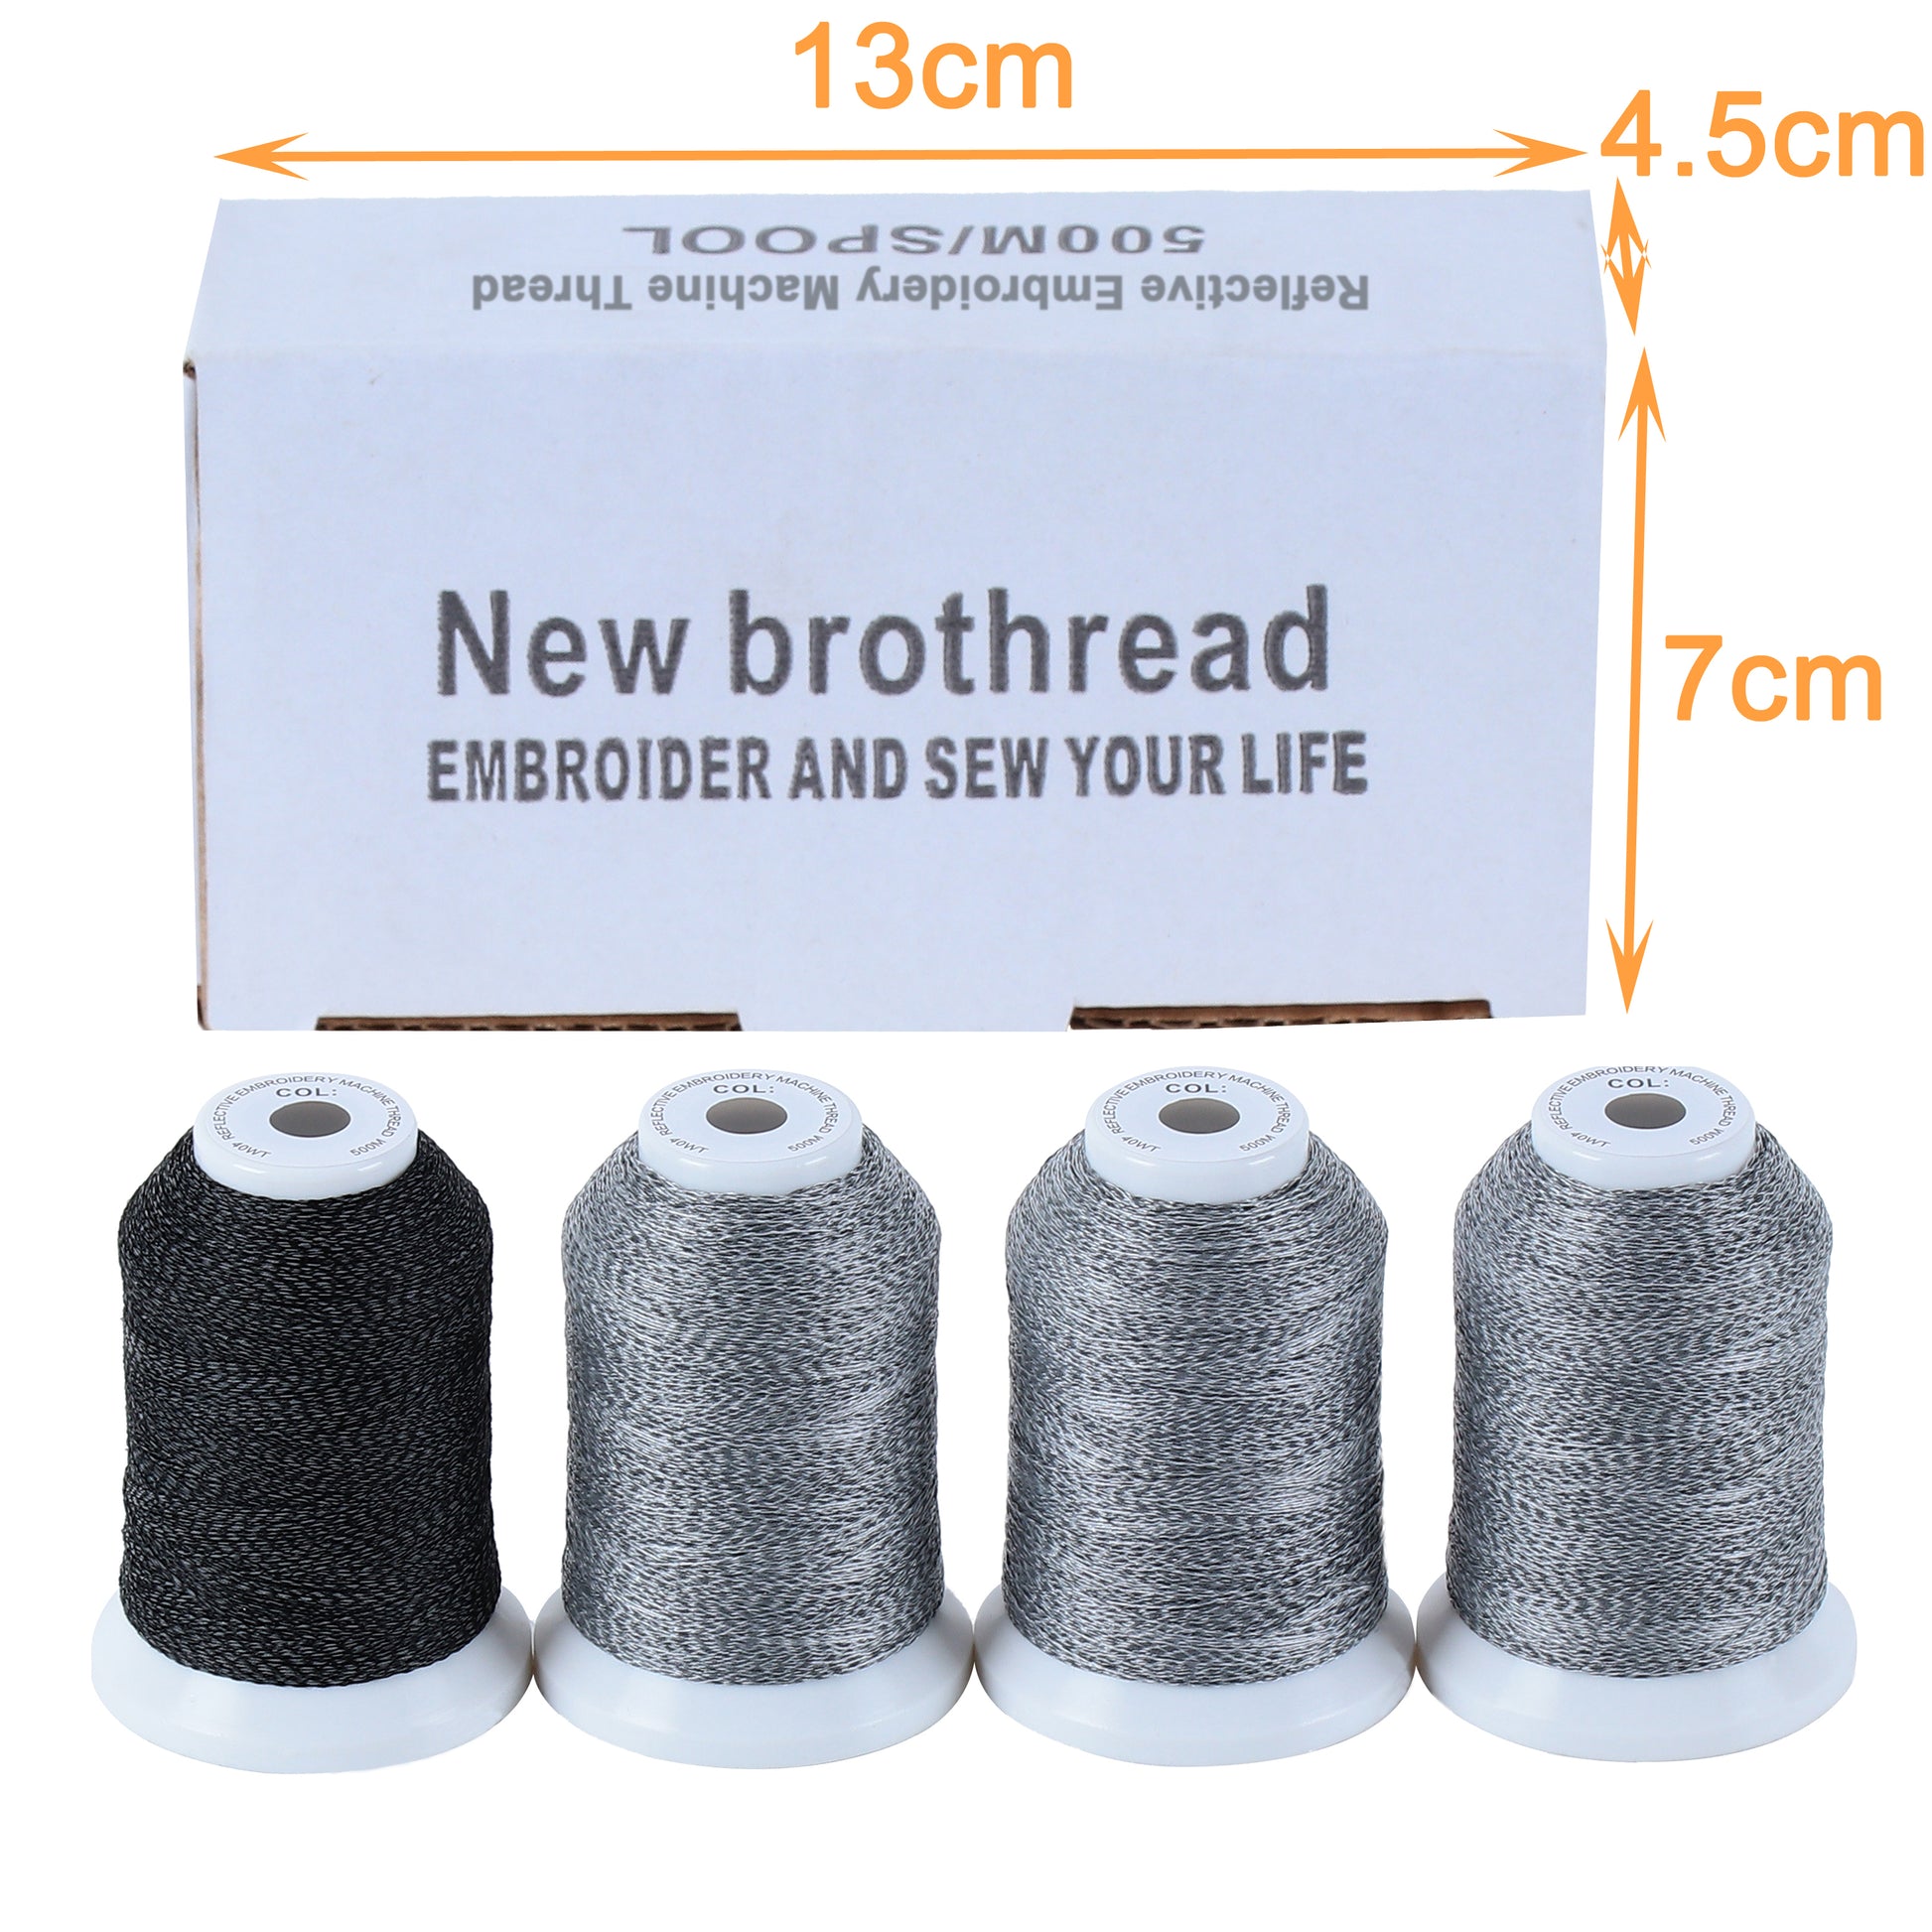 New brothread Fusible Iron on Cut Away Machine Embroidery Stabilizer B